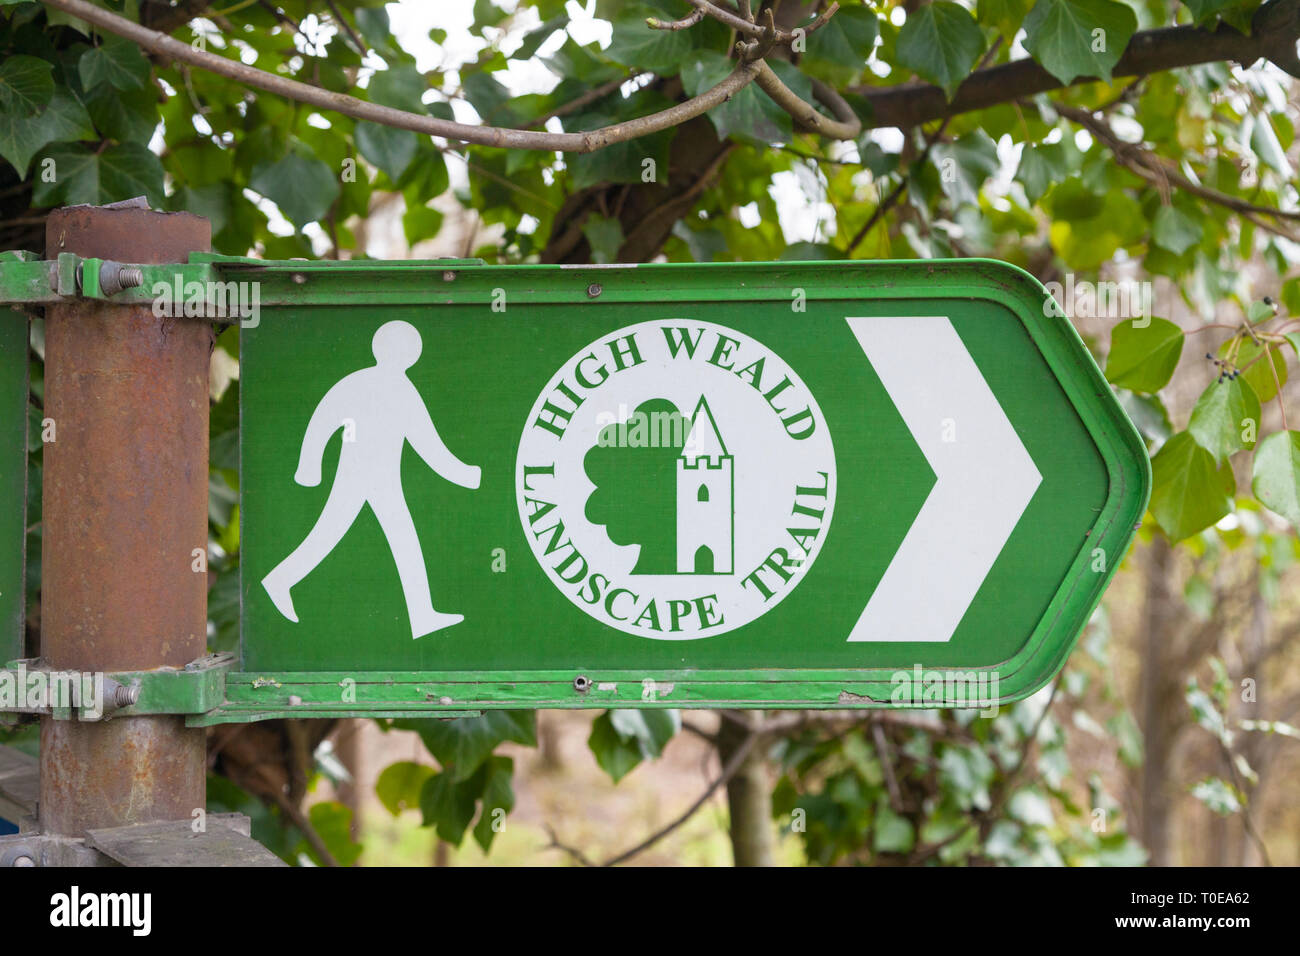 Sign directing people for the high weald landscape trail with image of person and direction, tenterden, kent, uk Stock Photo